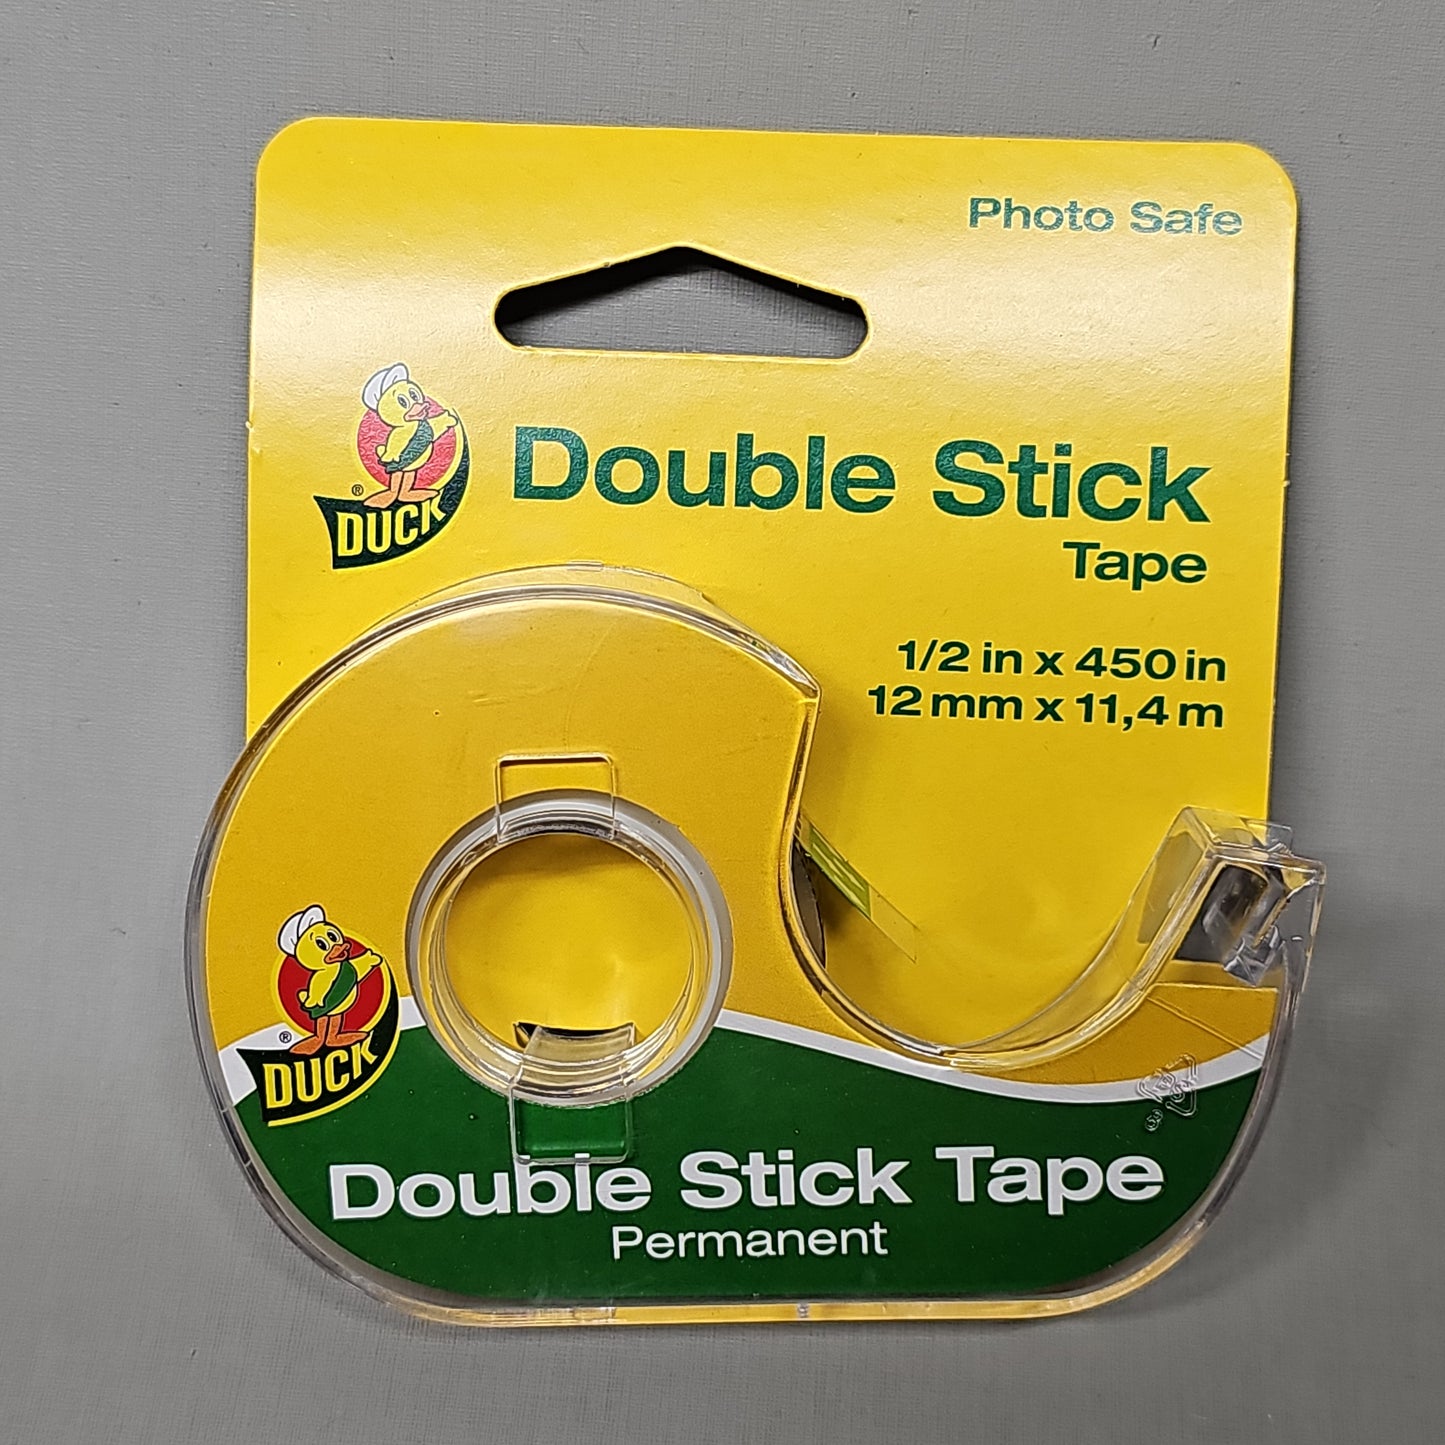 SHURTAPE DUCK Pack of 15 Double Stick Permanent Photo Safe Tape 1/2" x 450" (New)